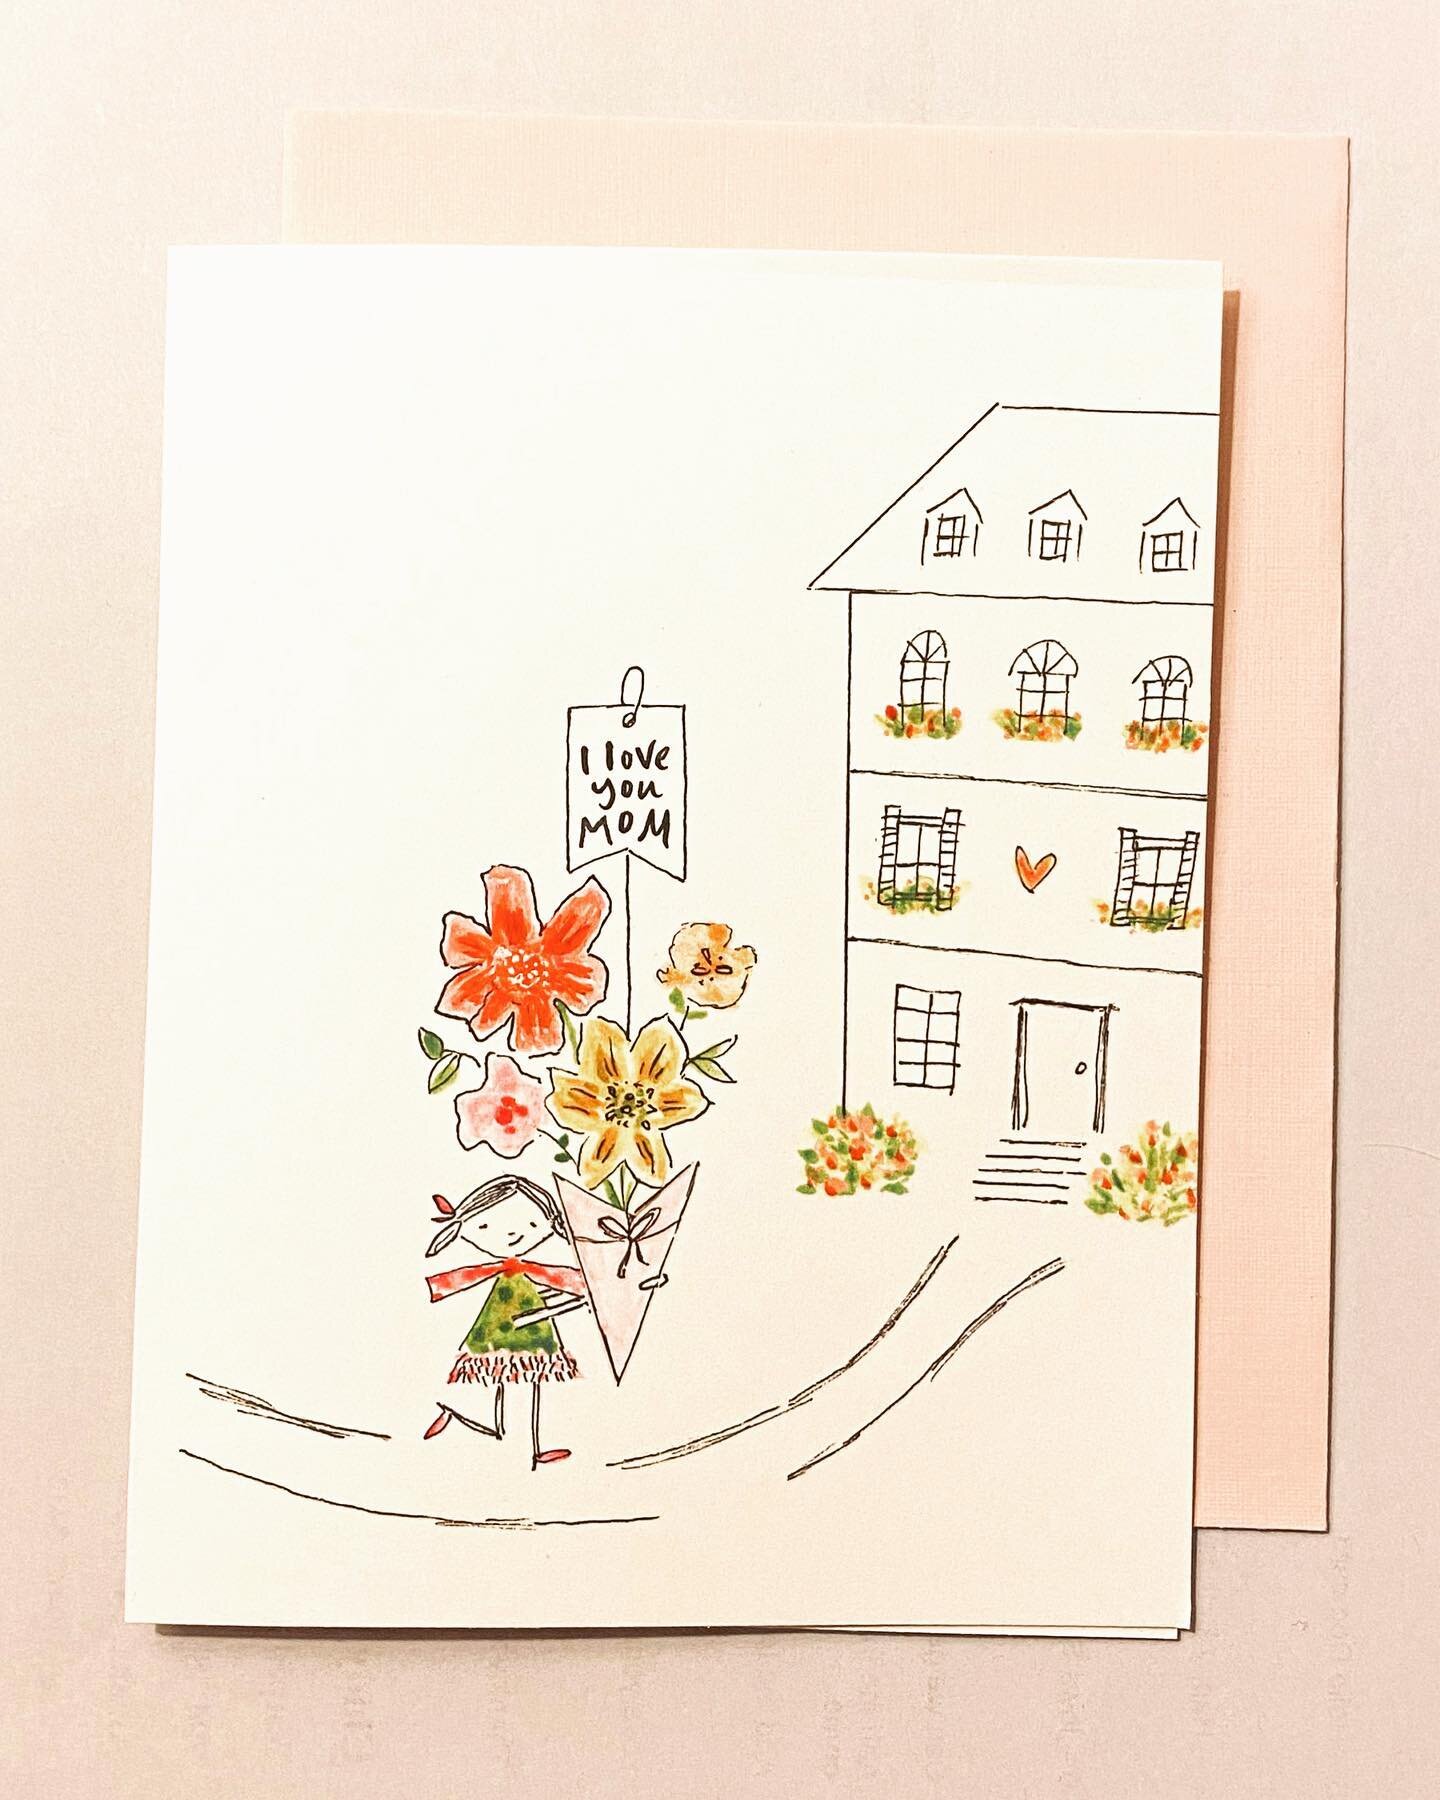 Skipping by with a Mother&rsquo;s Day card illustration! Hope your week is going well 🌸